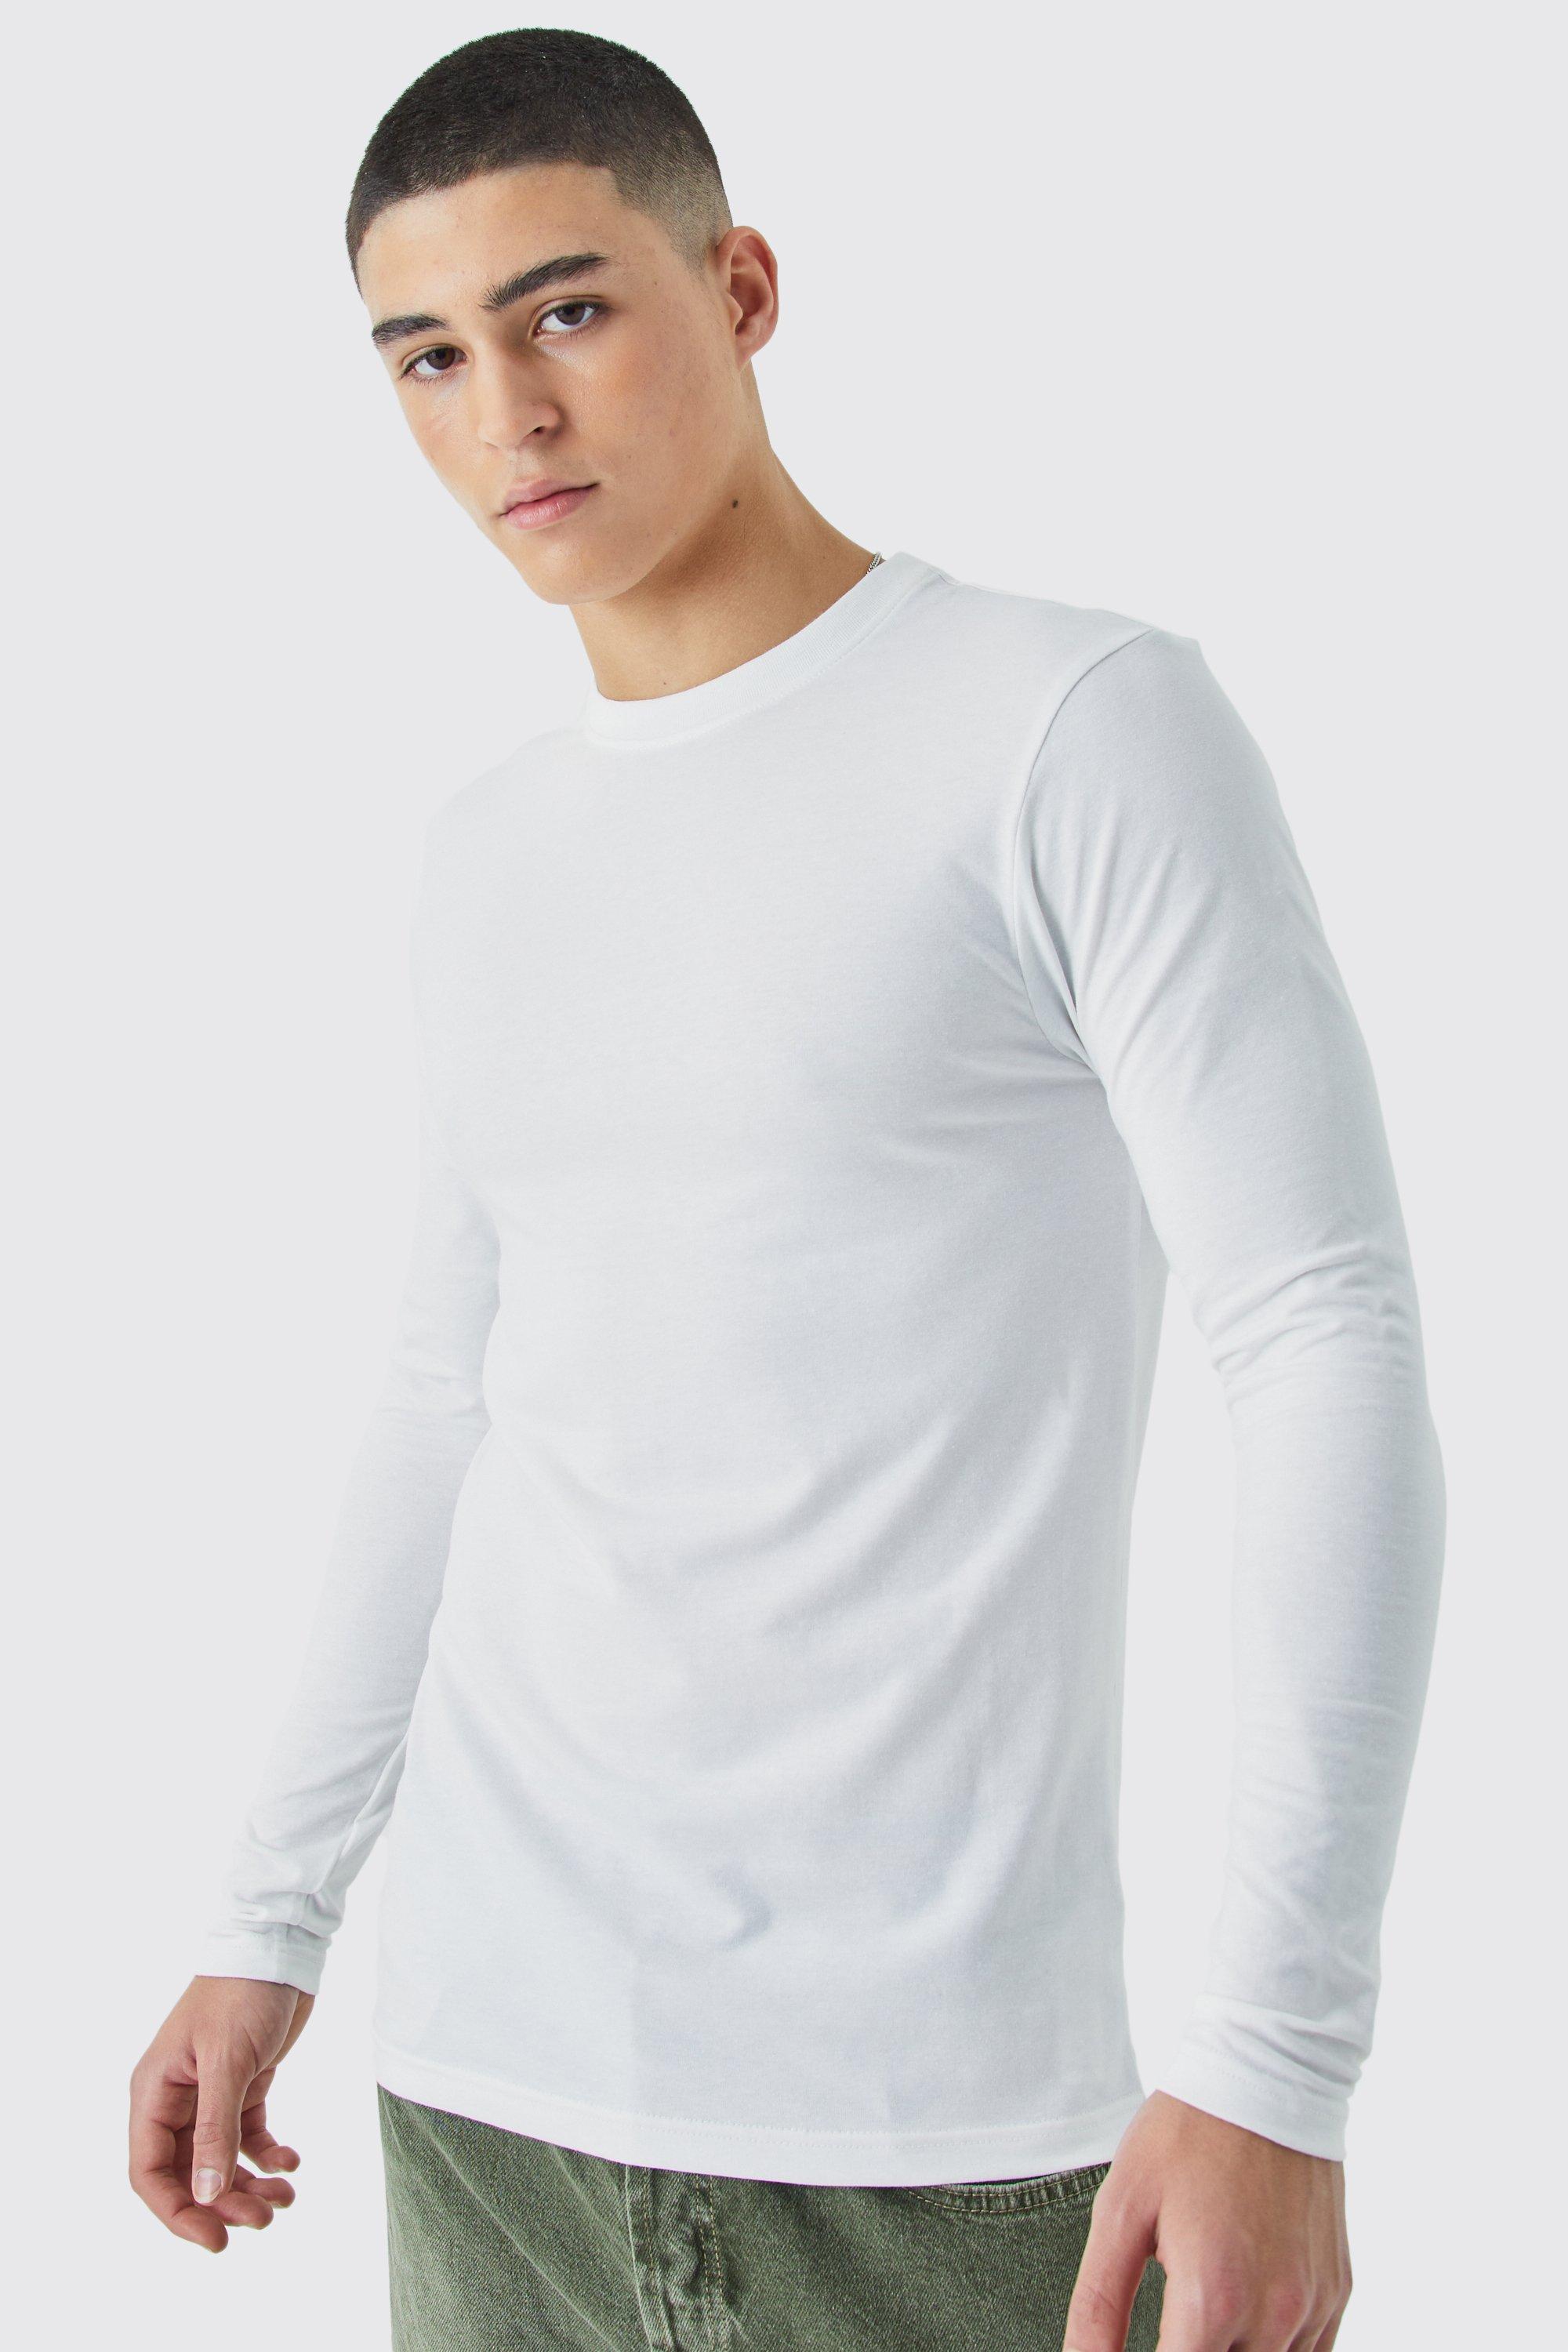 Mens White Long Sleeve Muscle Fit T-shirt, White